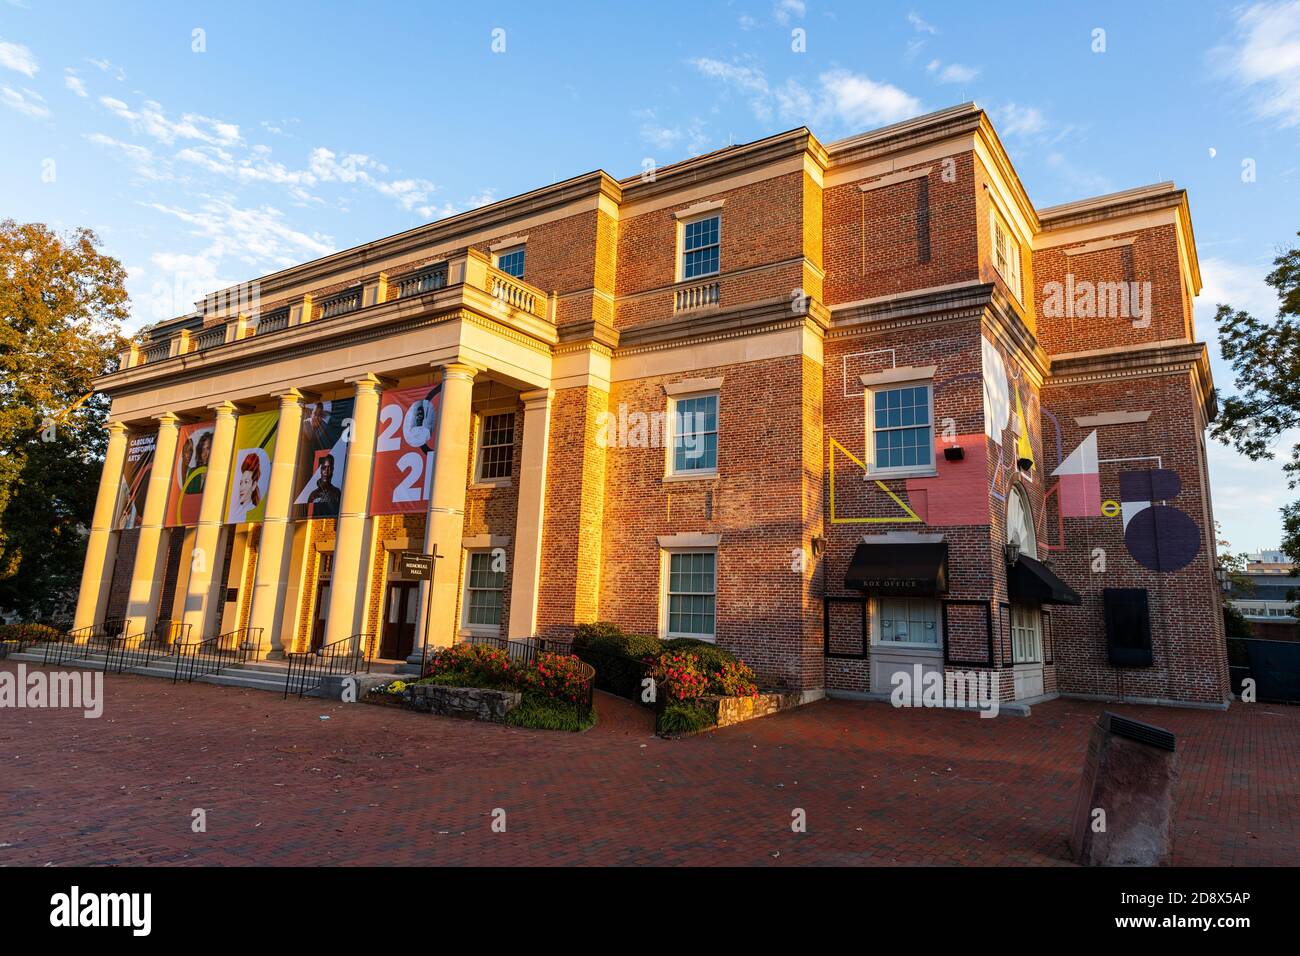 Chapel Hill, NC / USA - October 23, 2020: Memorial Hall on the Campus of UNC, University of North Carolina at Chapel Hill Stock Photo